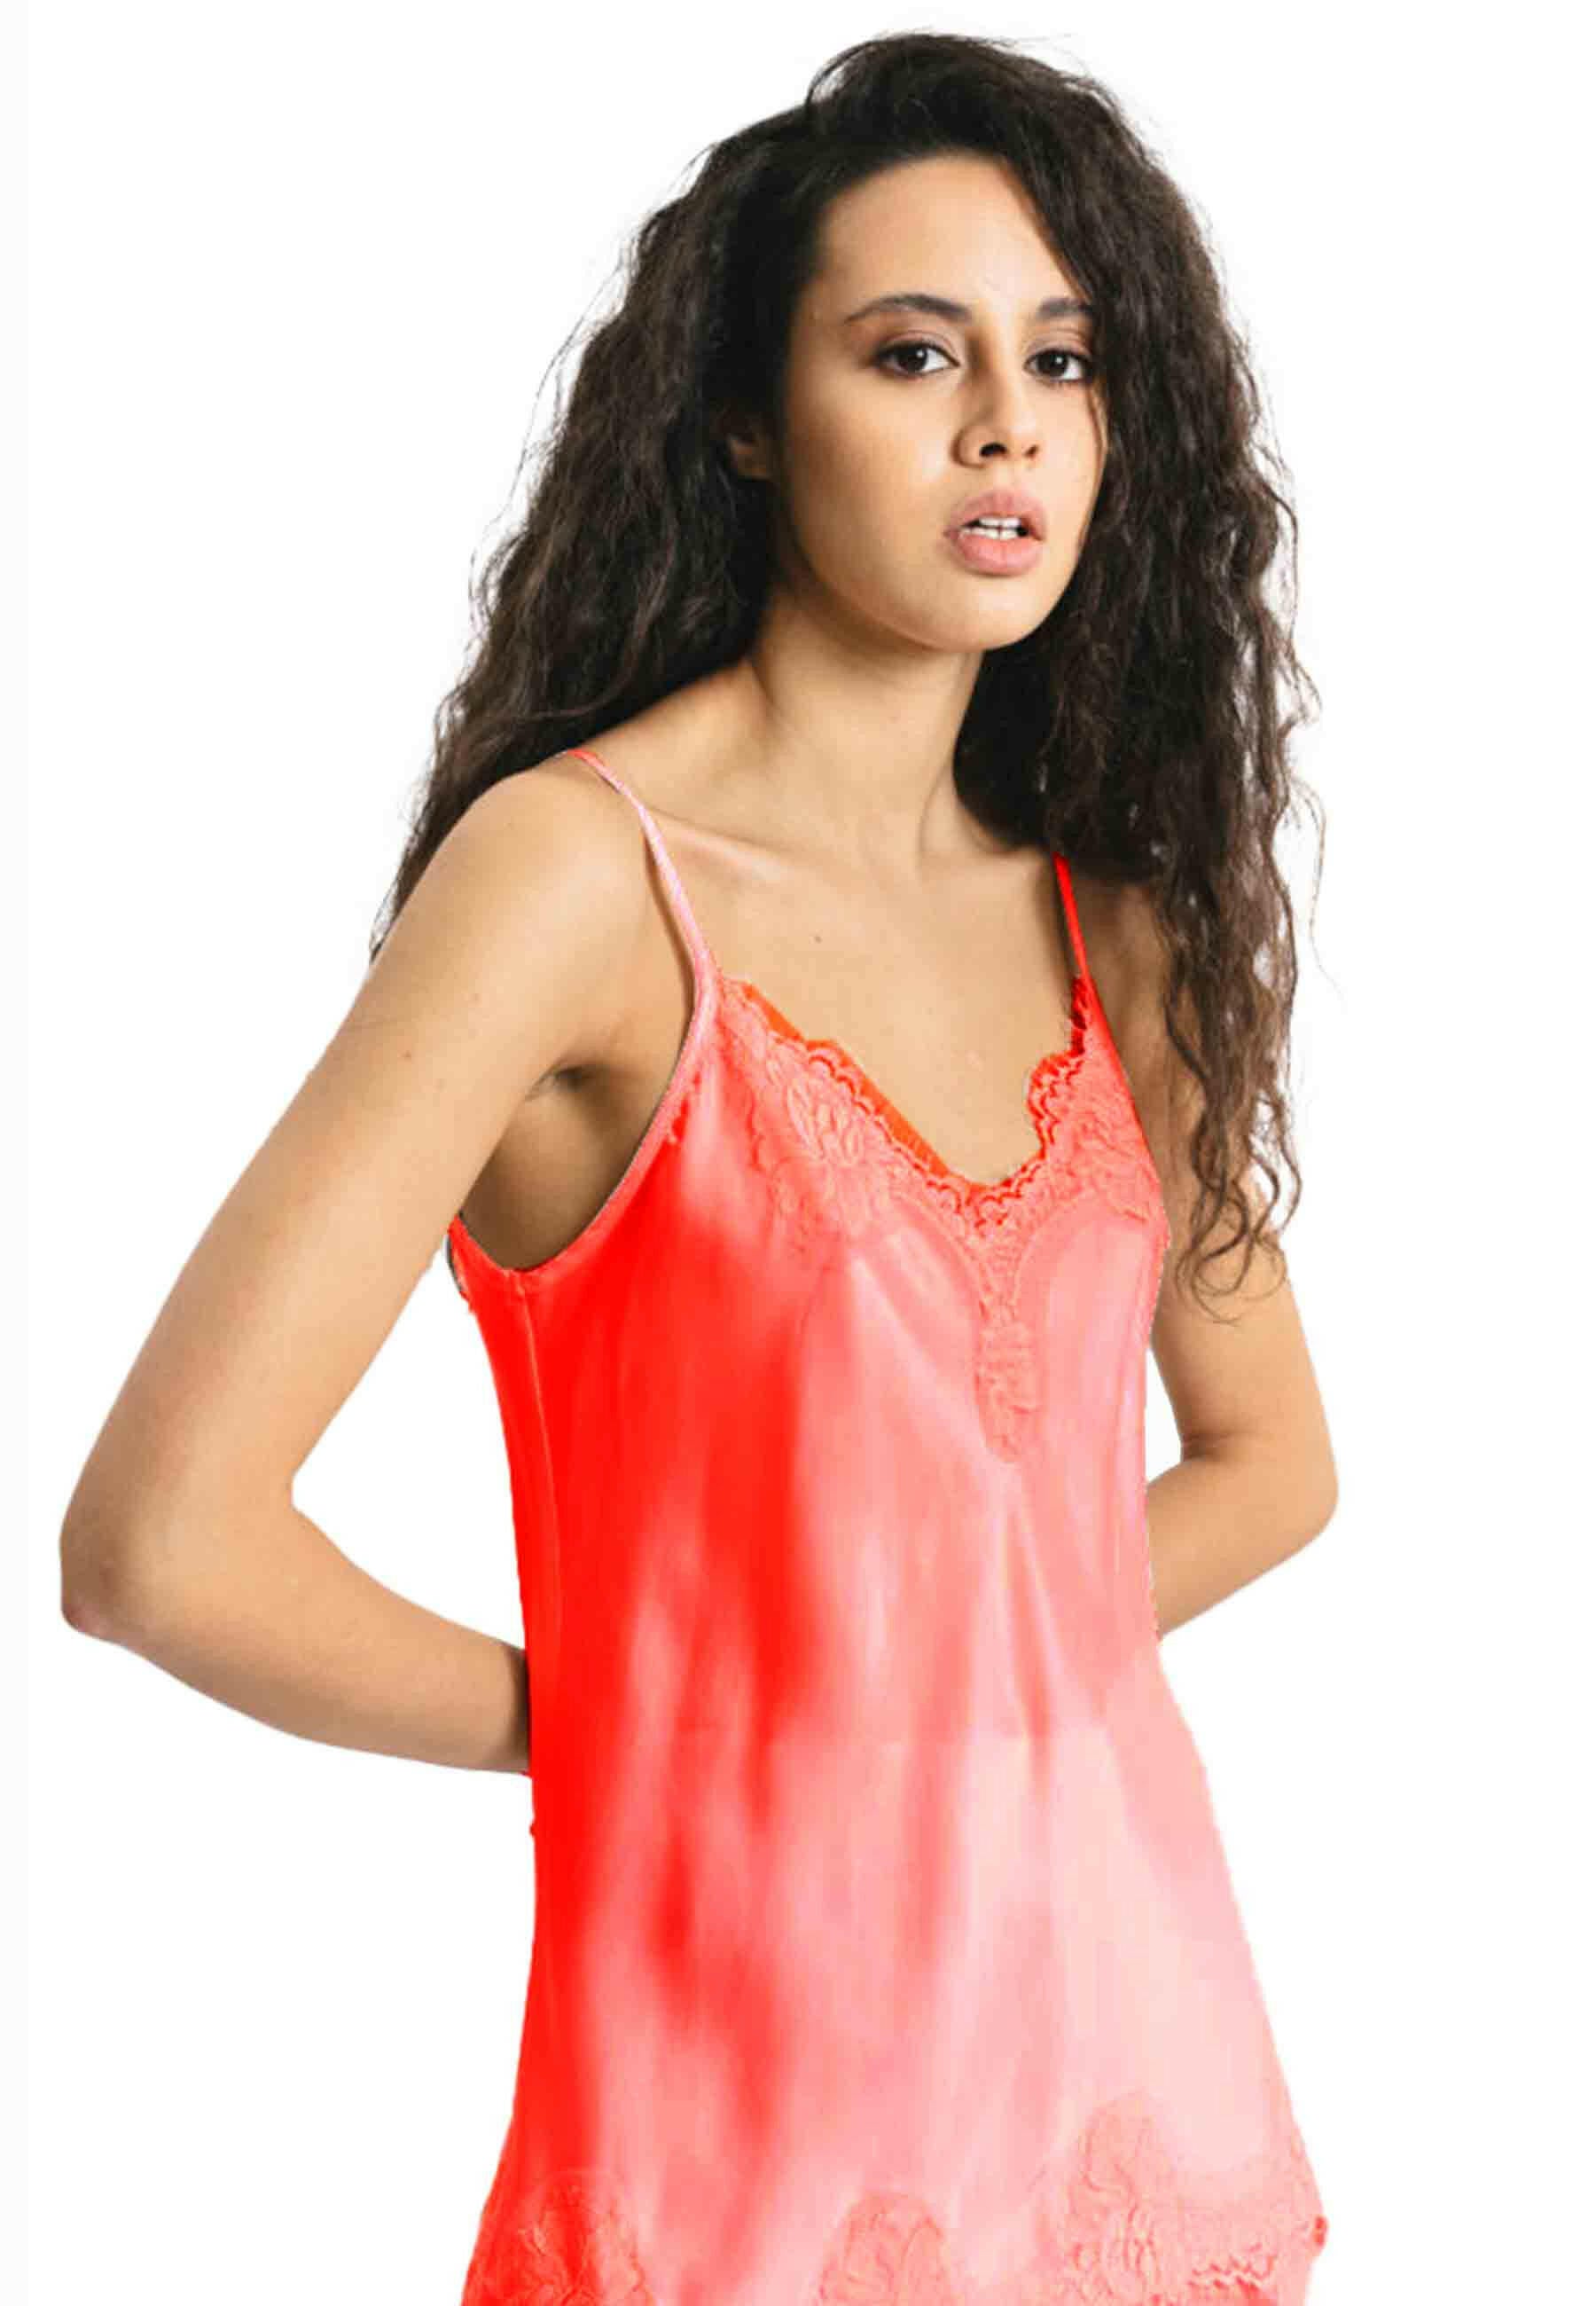 Women's top with tone-on-tone salmon lace